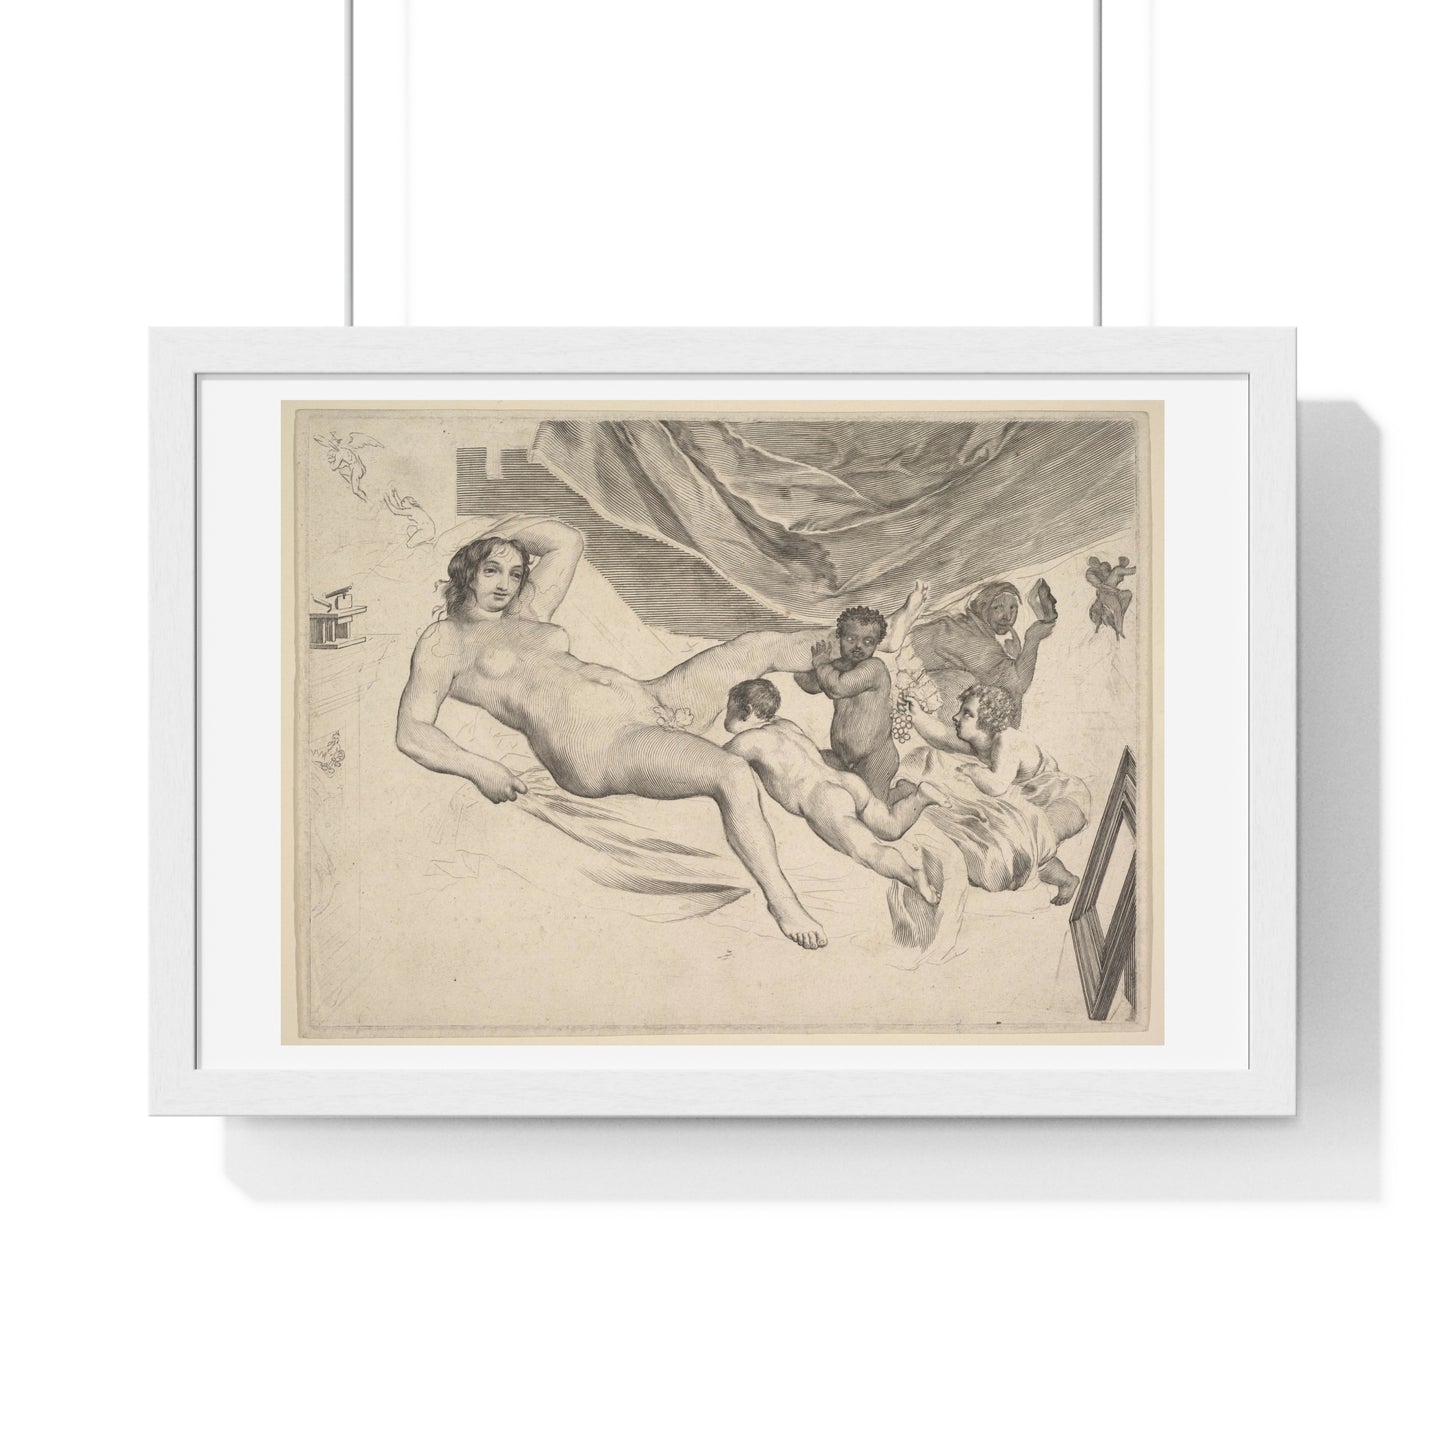 Allegorical Subject: Nude Woman, Three Children and a Mousetrap 'La Sourcière' by Claude Mellan, from the Original, Framed Art Print